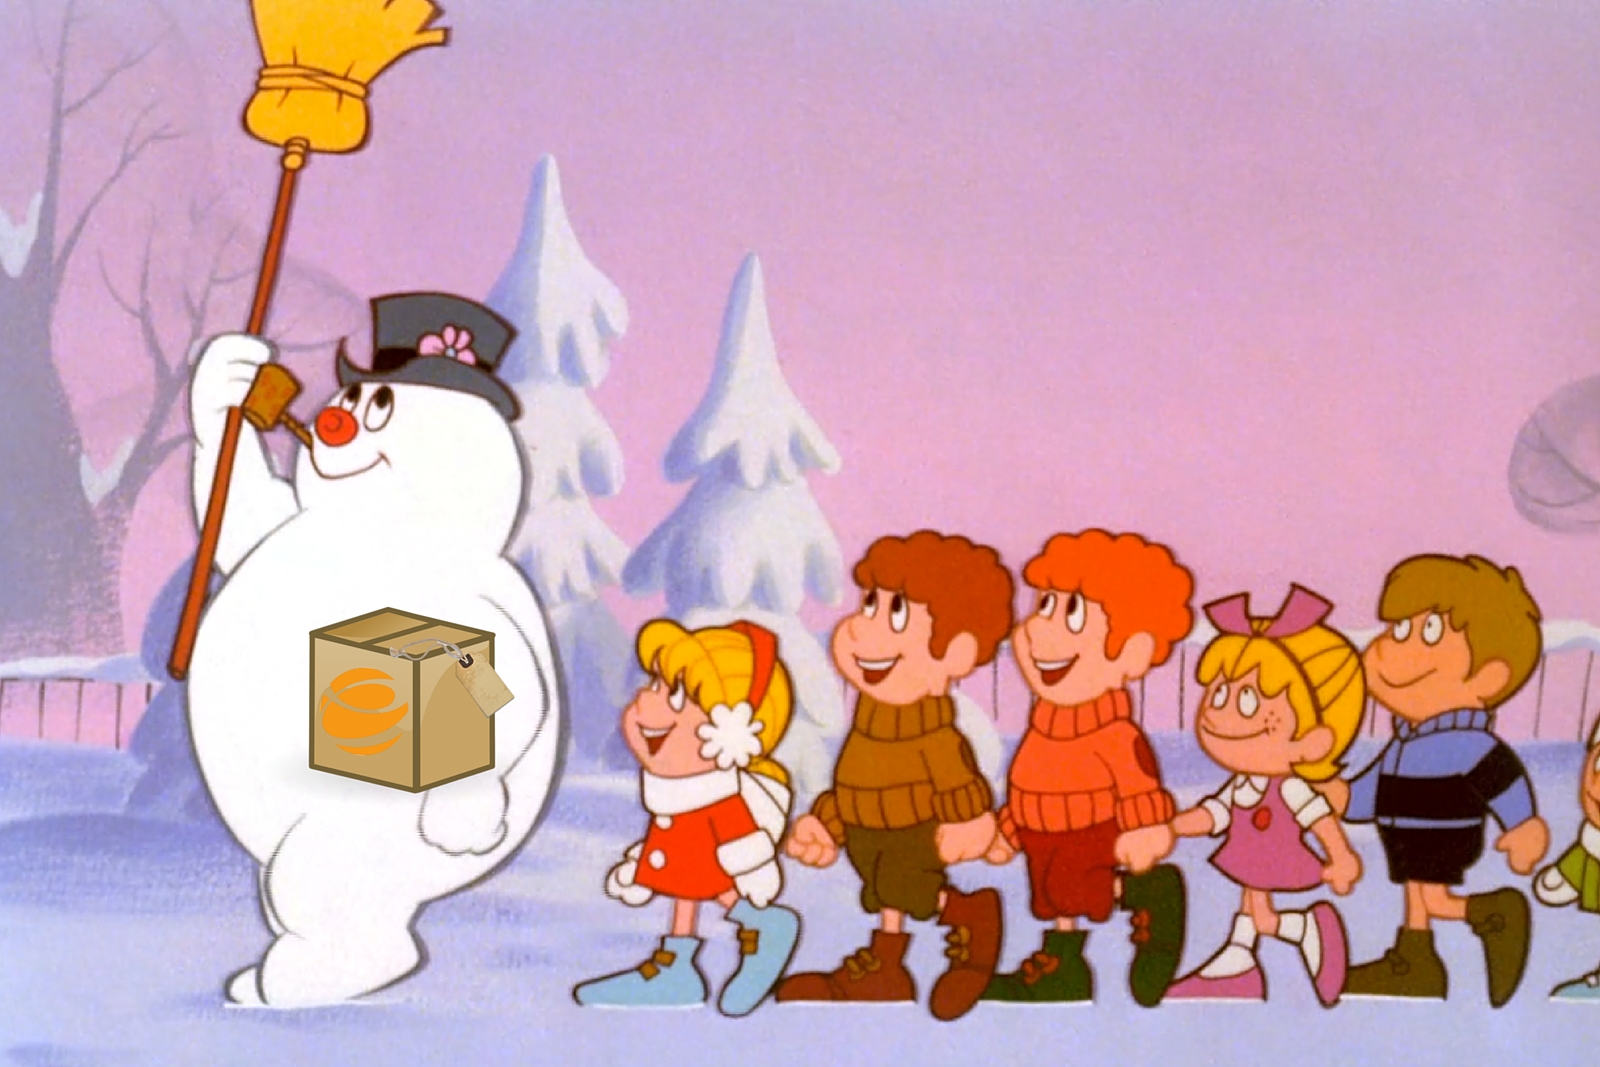 Frosty the Snowman holding Endicia box - Fun twist on classic holiday song.